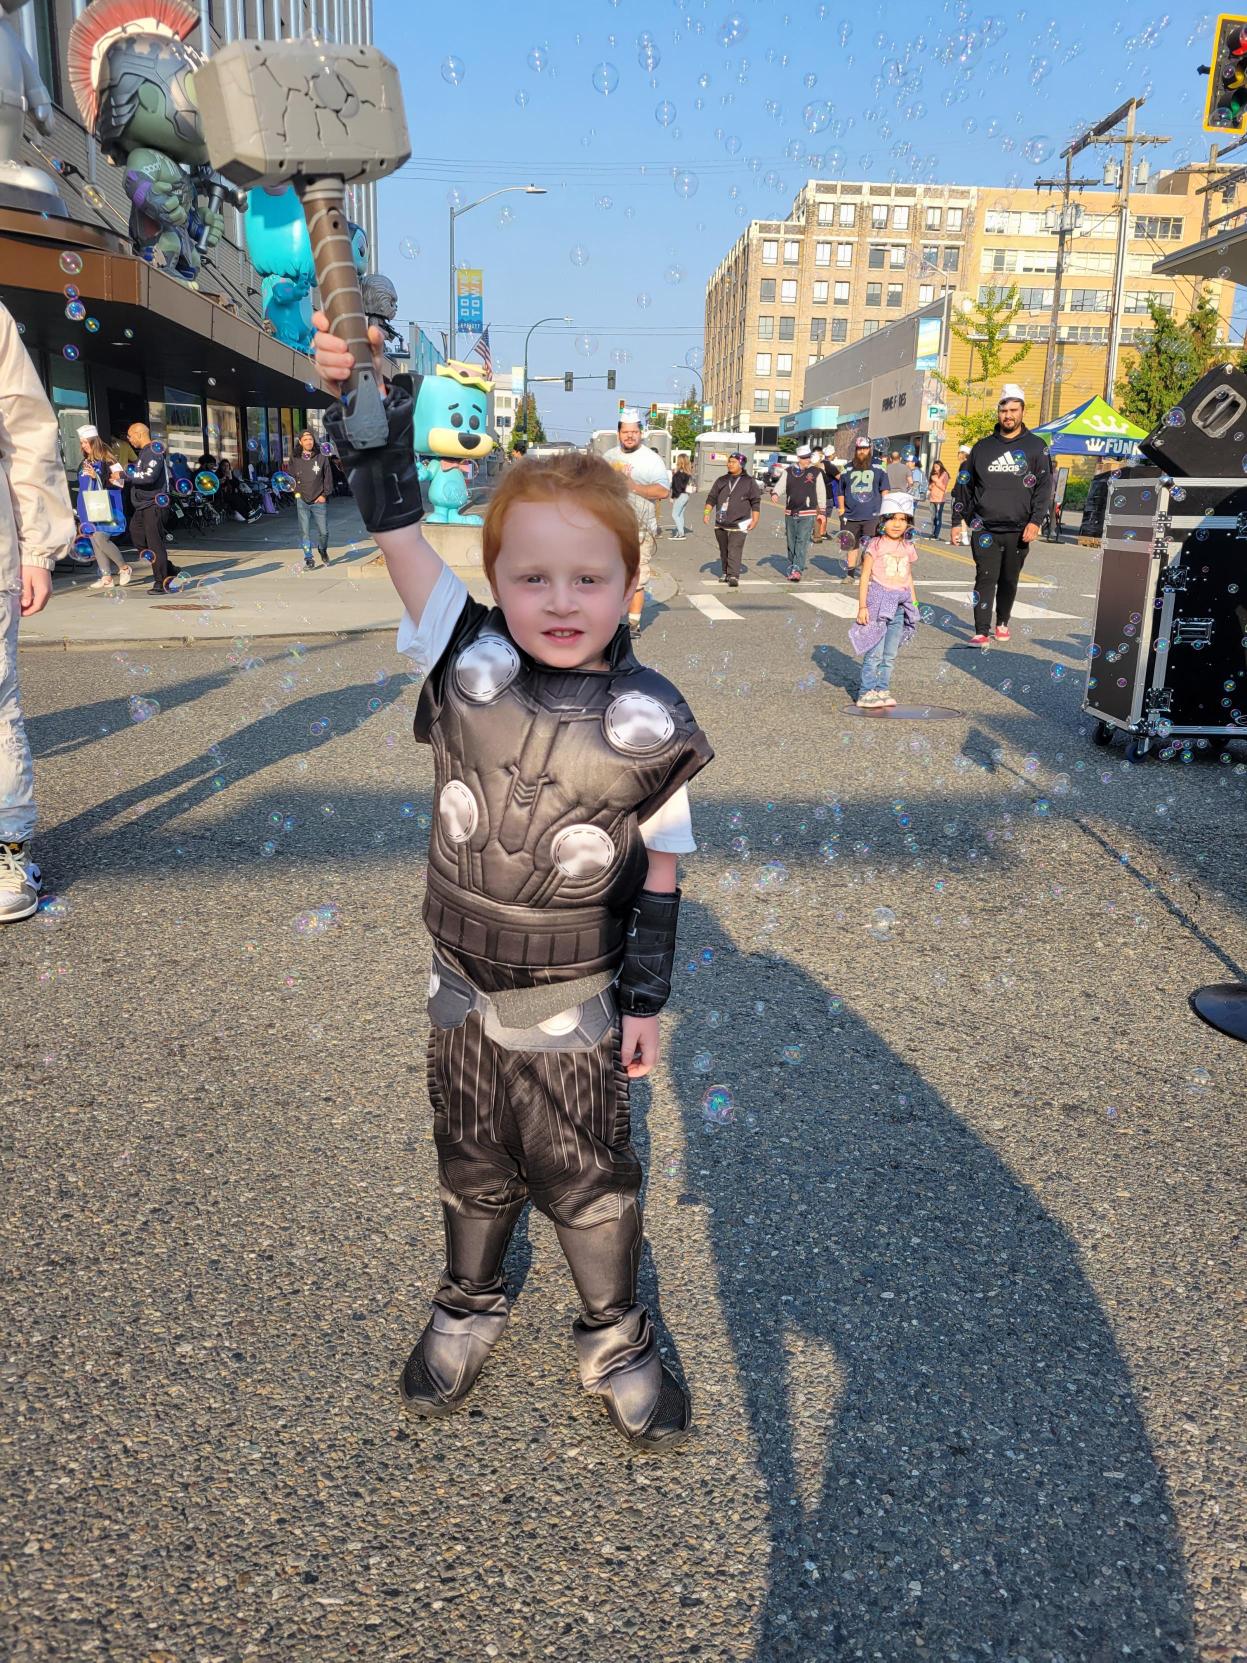 Thor! A young Thor is charged up and ready to go, raising his hammer in the street, while a crowd looks on. Bubbles from the DJ station float all around.